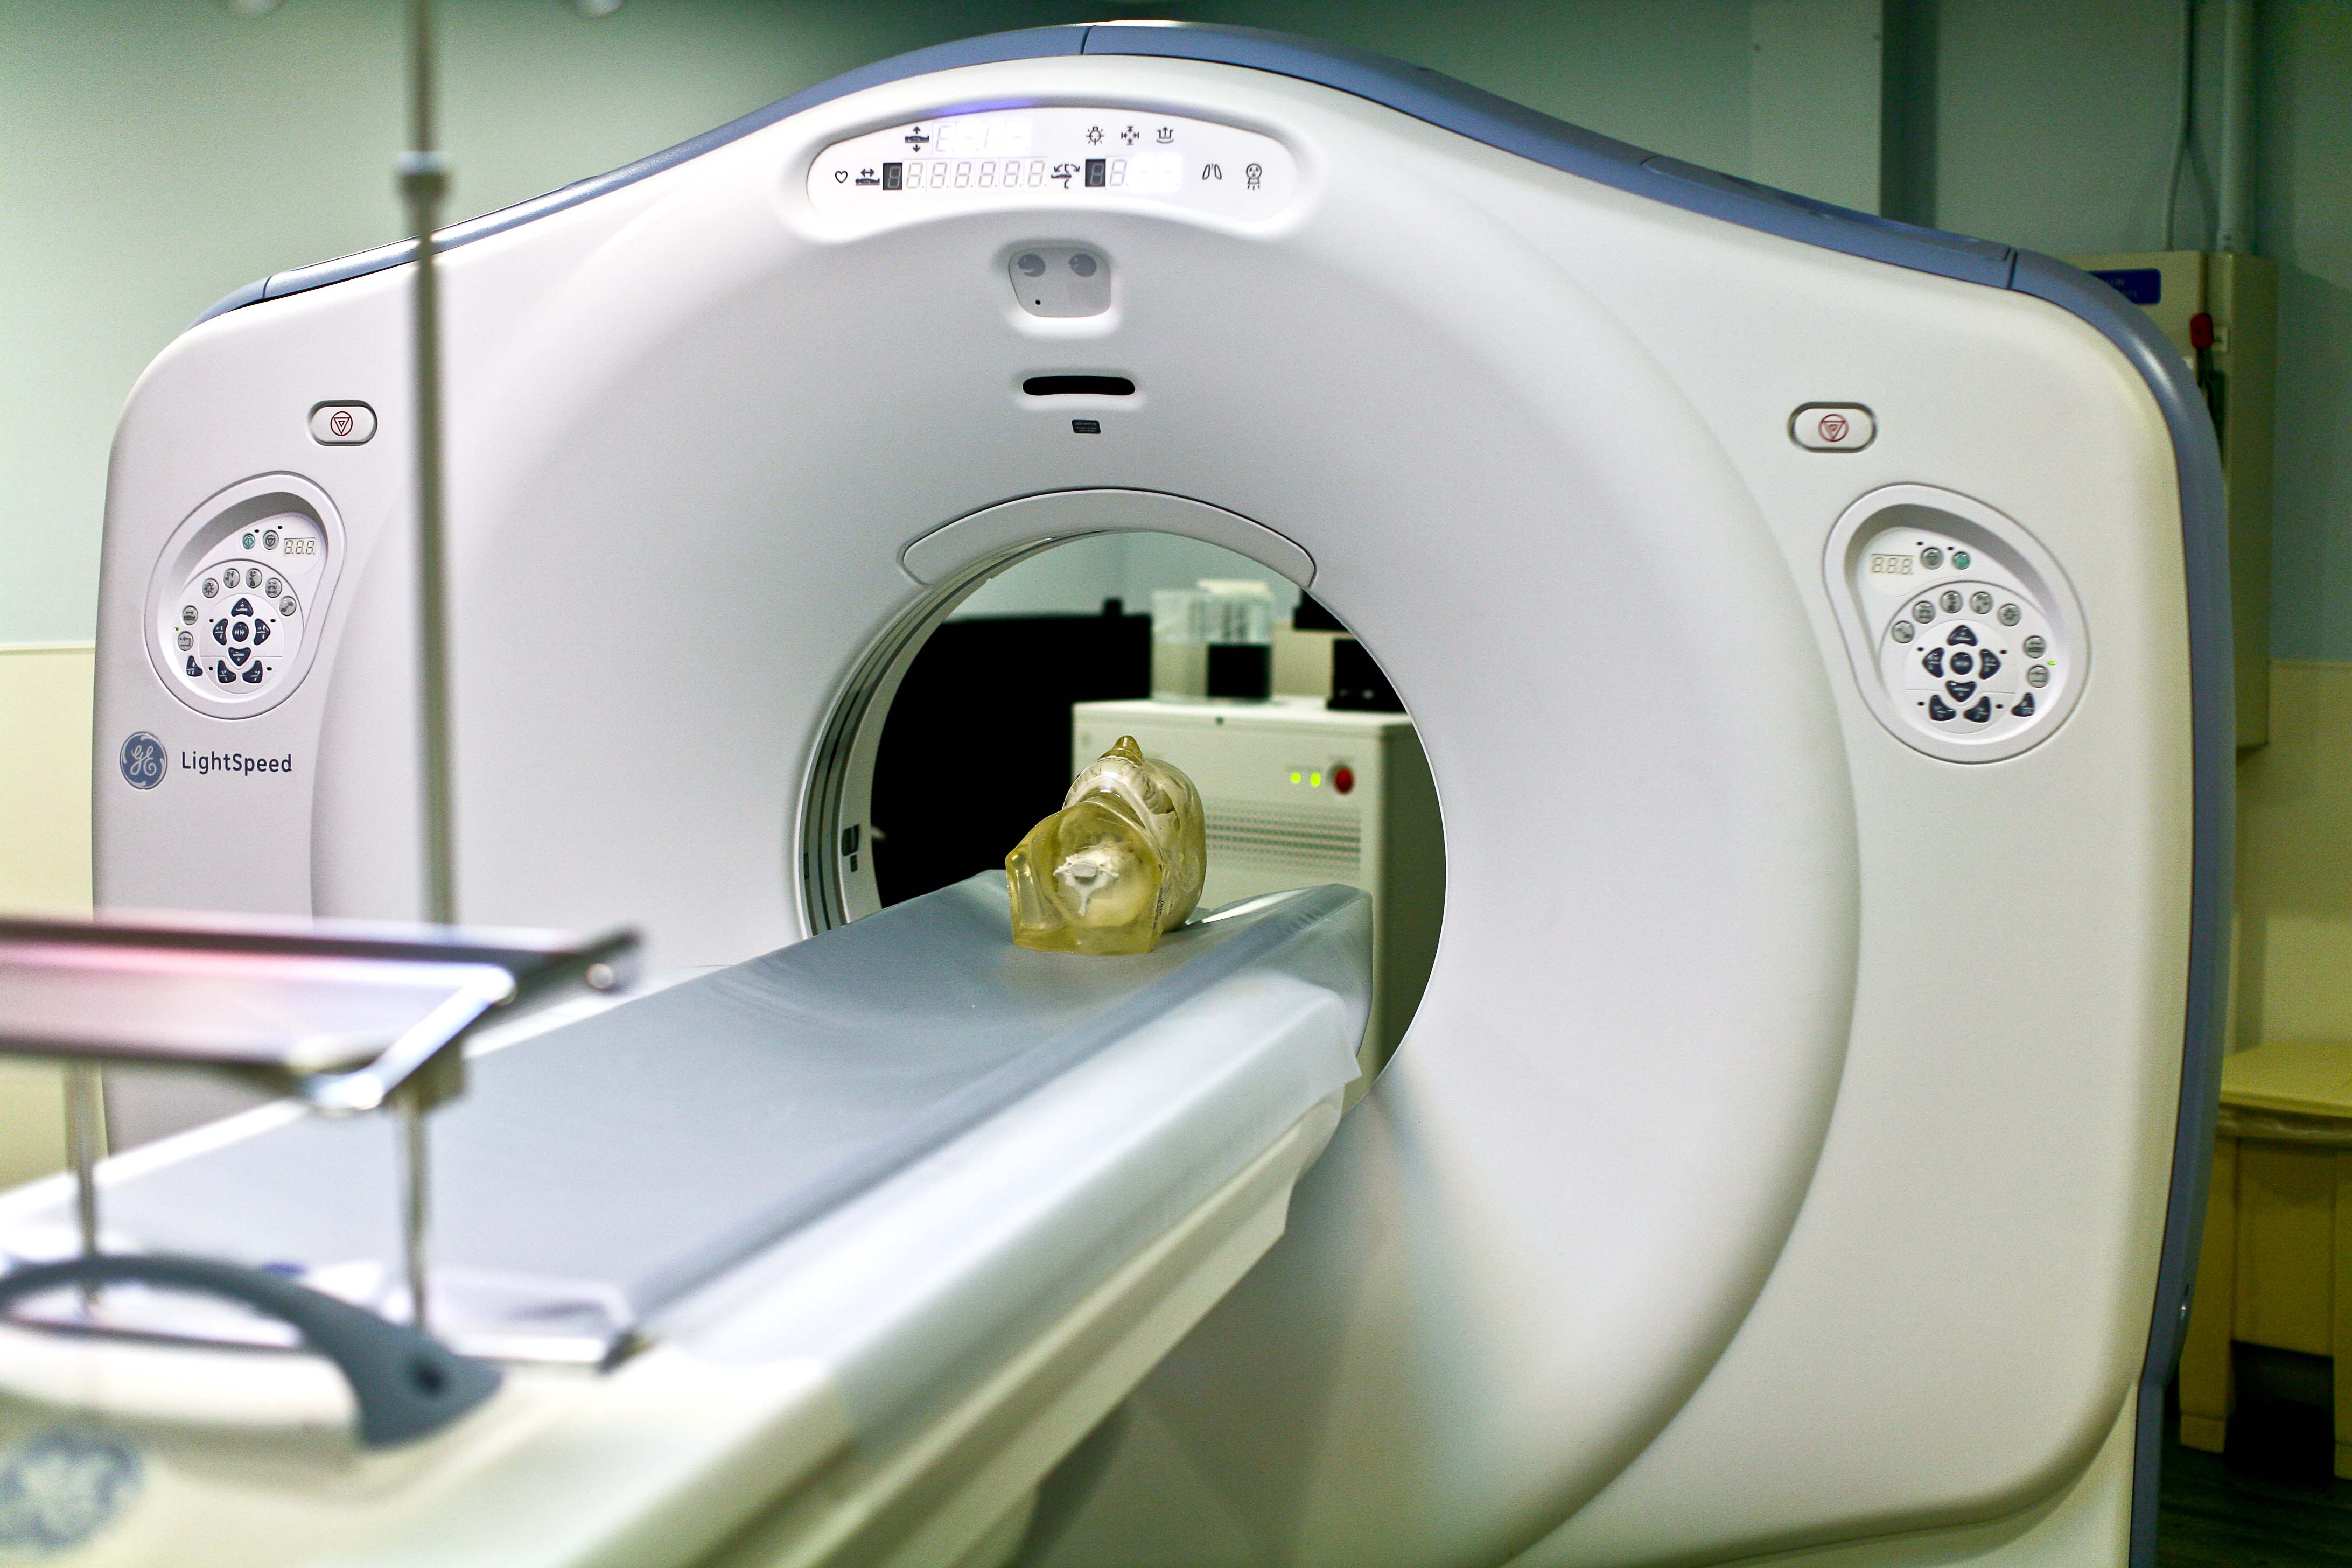 “CT Ranch” opens to younger patients facing new imaging technology